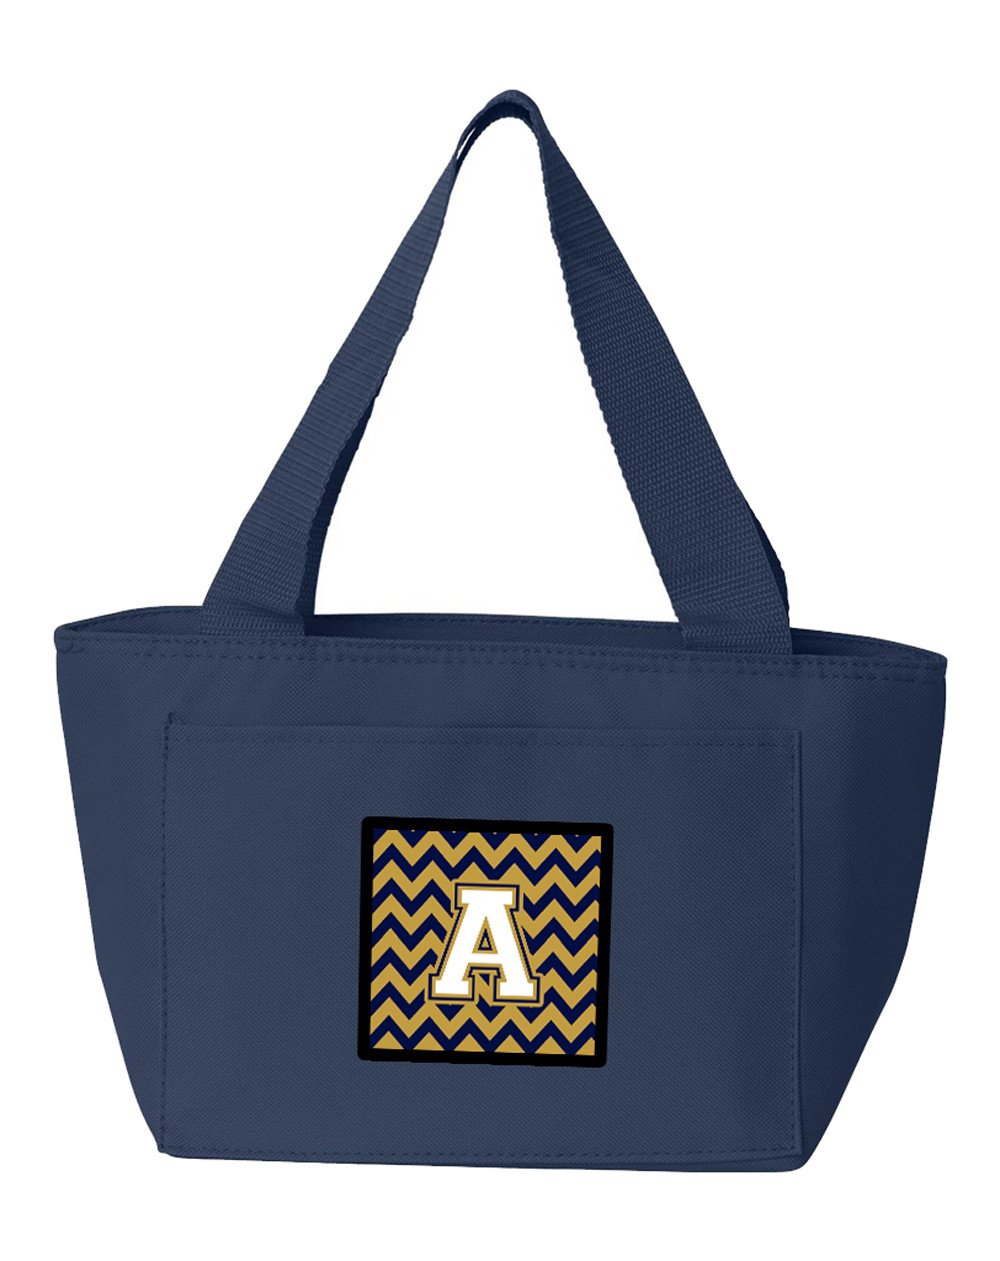 Letter A Chevron Navy Blue and Gold Lunch Bag CJ1057-ANA-8808 by Caroline's Treasures